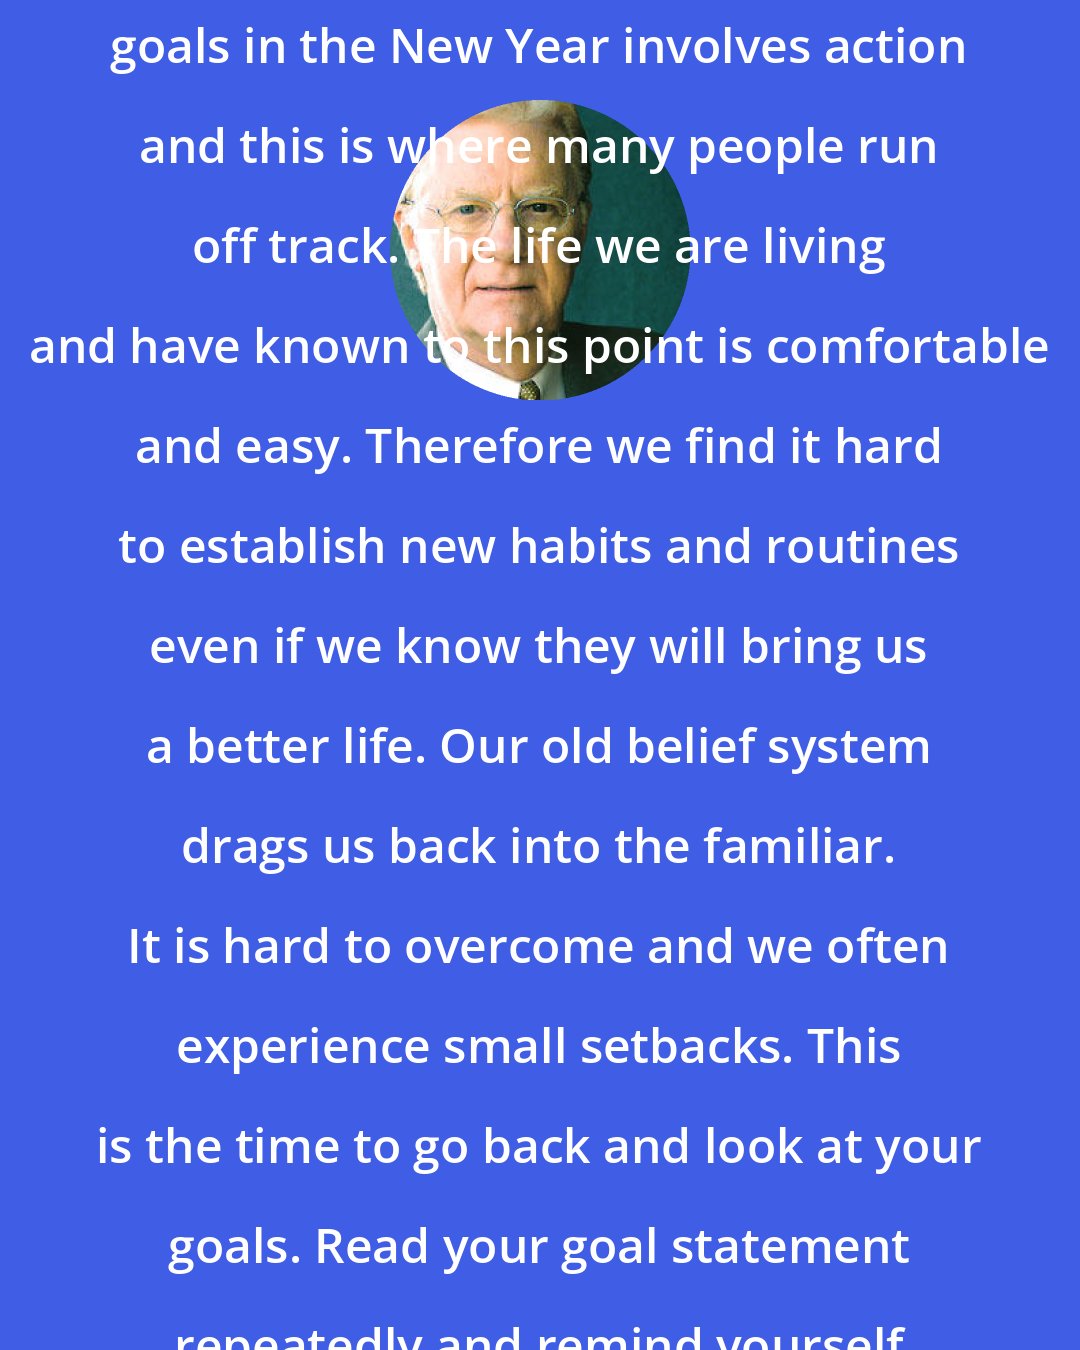 Bob Proctor: The second step to achieving your goals in the New Year involves action and this is where many people run off track. The life we are living and have known to this point is comfortable and easy. Therefore we find it hard to establish new habits and routines even if we know they will bring us a better life. Our old belief system drags us back into the familiar. It is hard to overcome and we often experience small setbacks. This is the time to go back and look at your goals. Read your goal statement repeatedly and remind yourself of what you want and why.